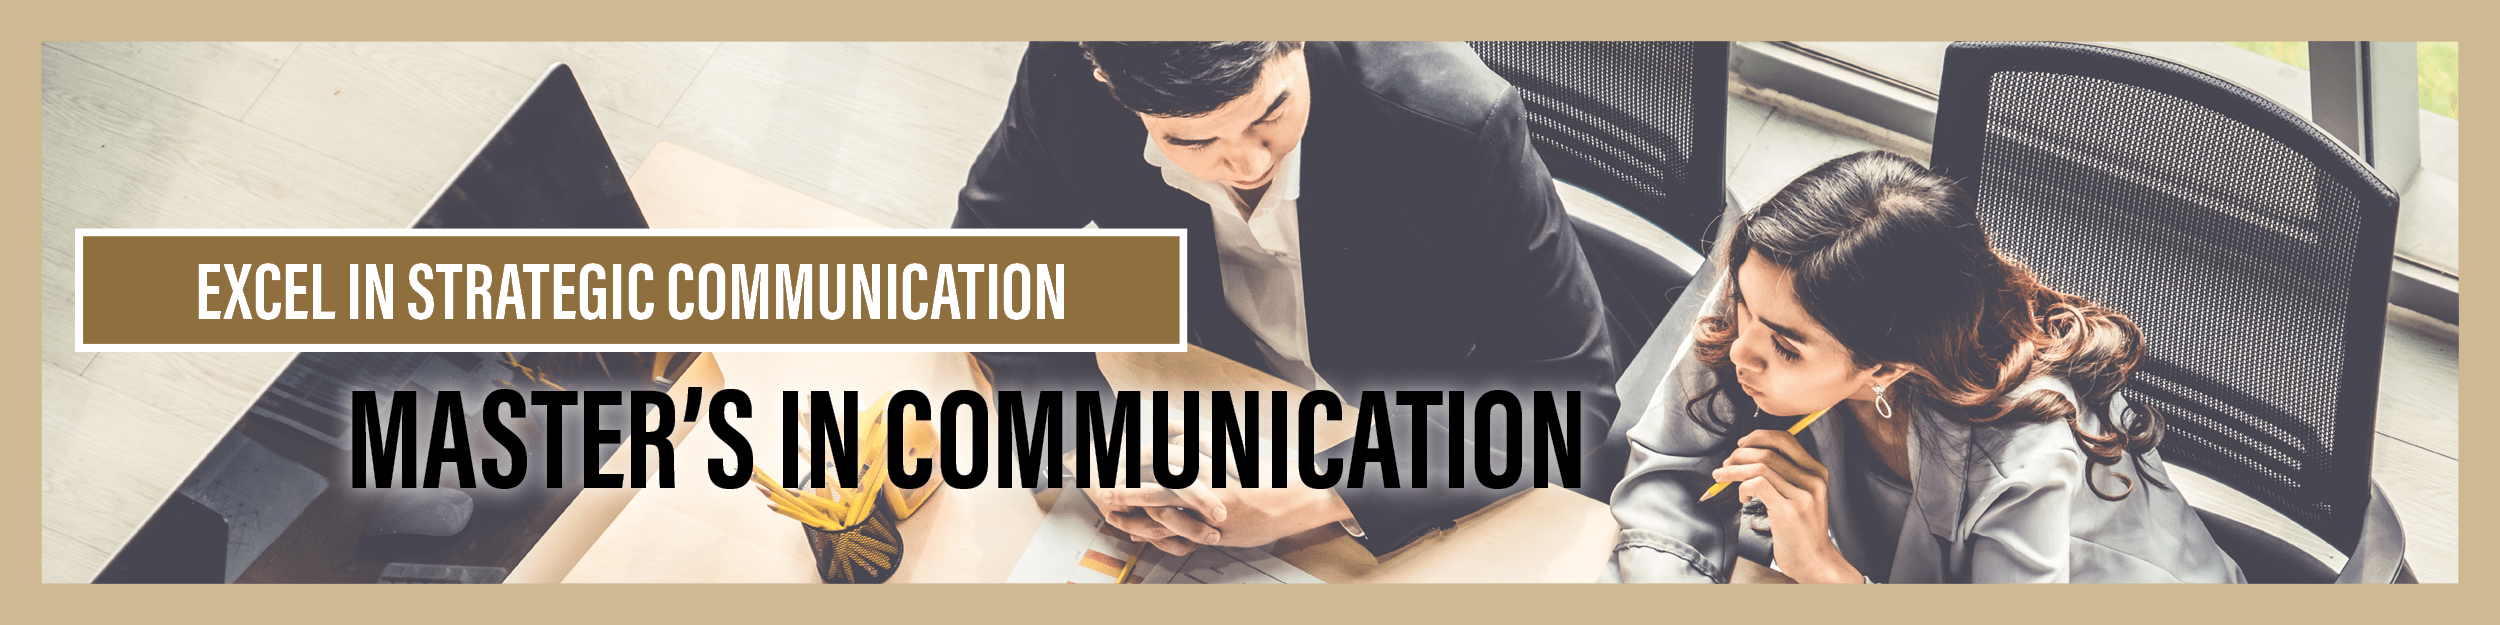 Master's in Communication